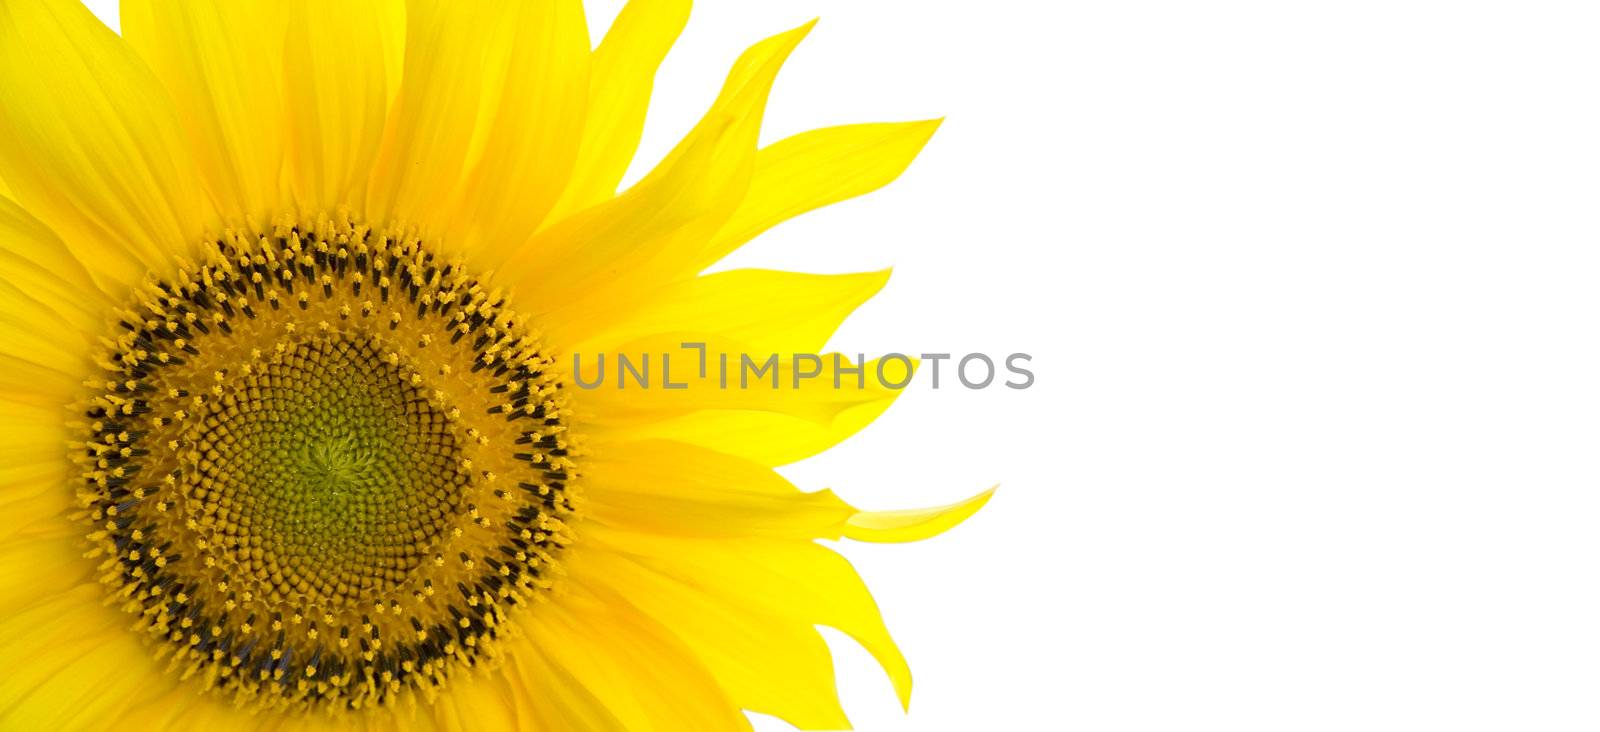 Sunflower background with place for your text by Kudryashka